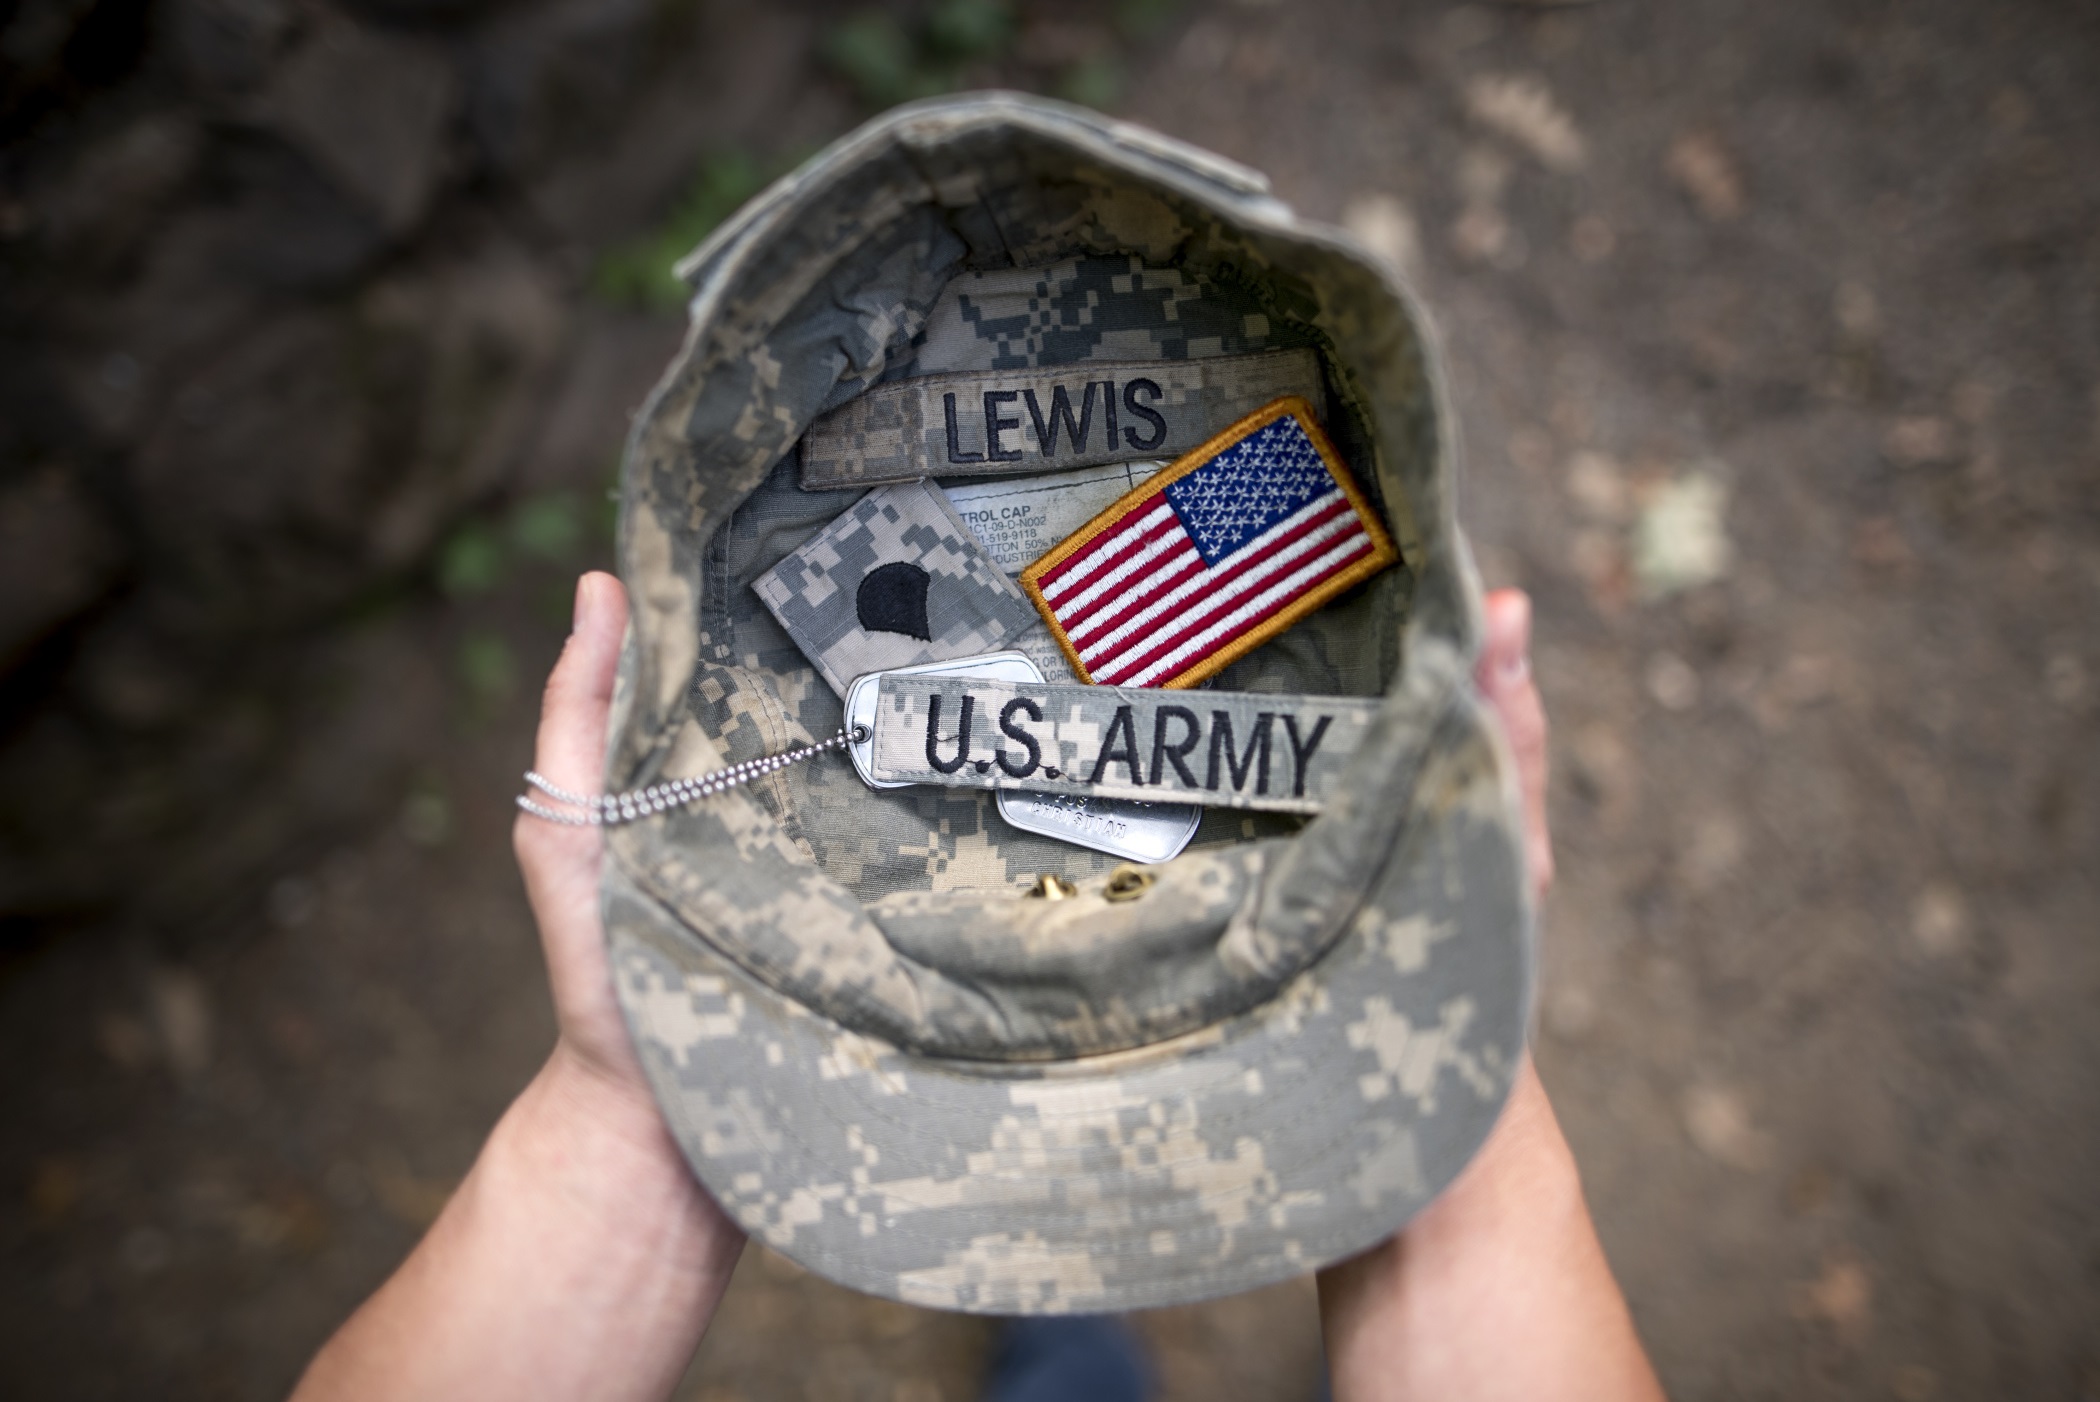 Two hands hold an Army cap, which contains two dog tags, an American flag patch, and tags reading "Lewis" and "U.S. Army."